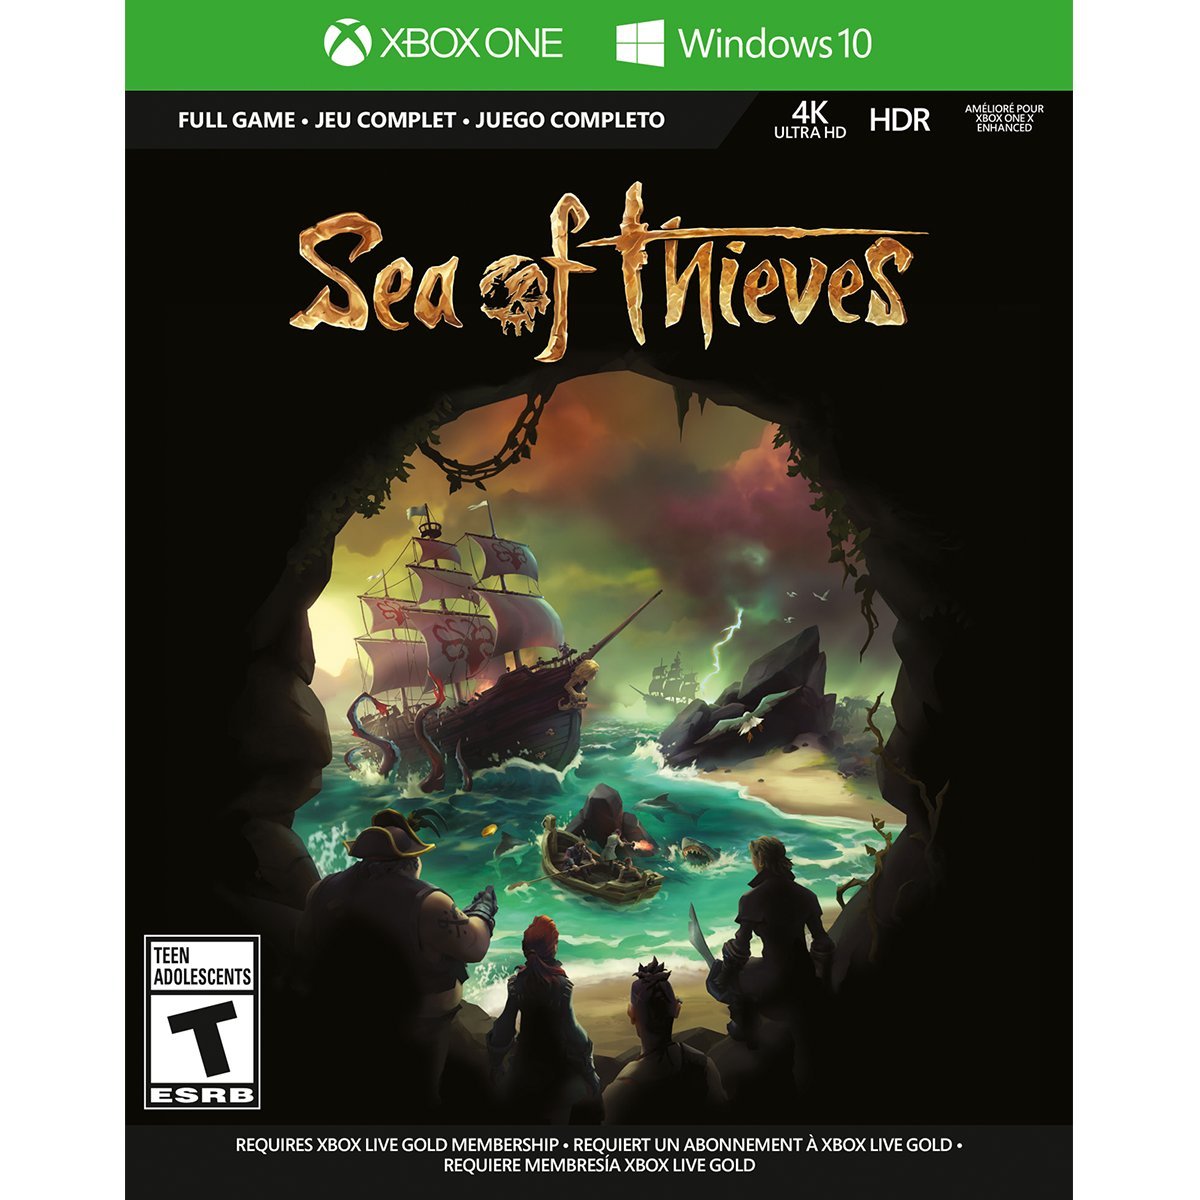 Xbox One S 1TB Console - Sea of Thieves Bundle [Discontinued]